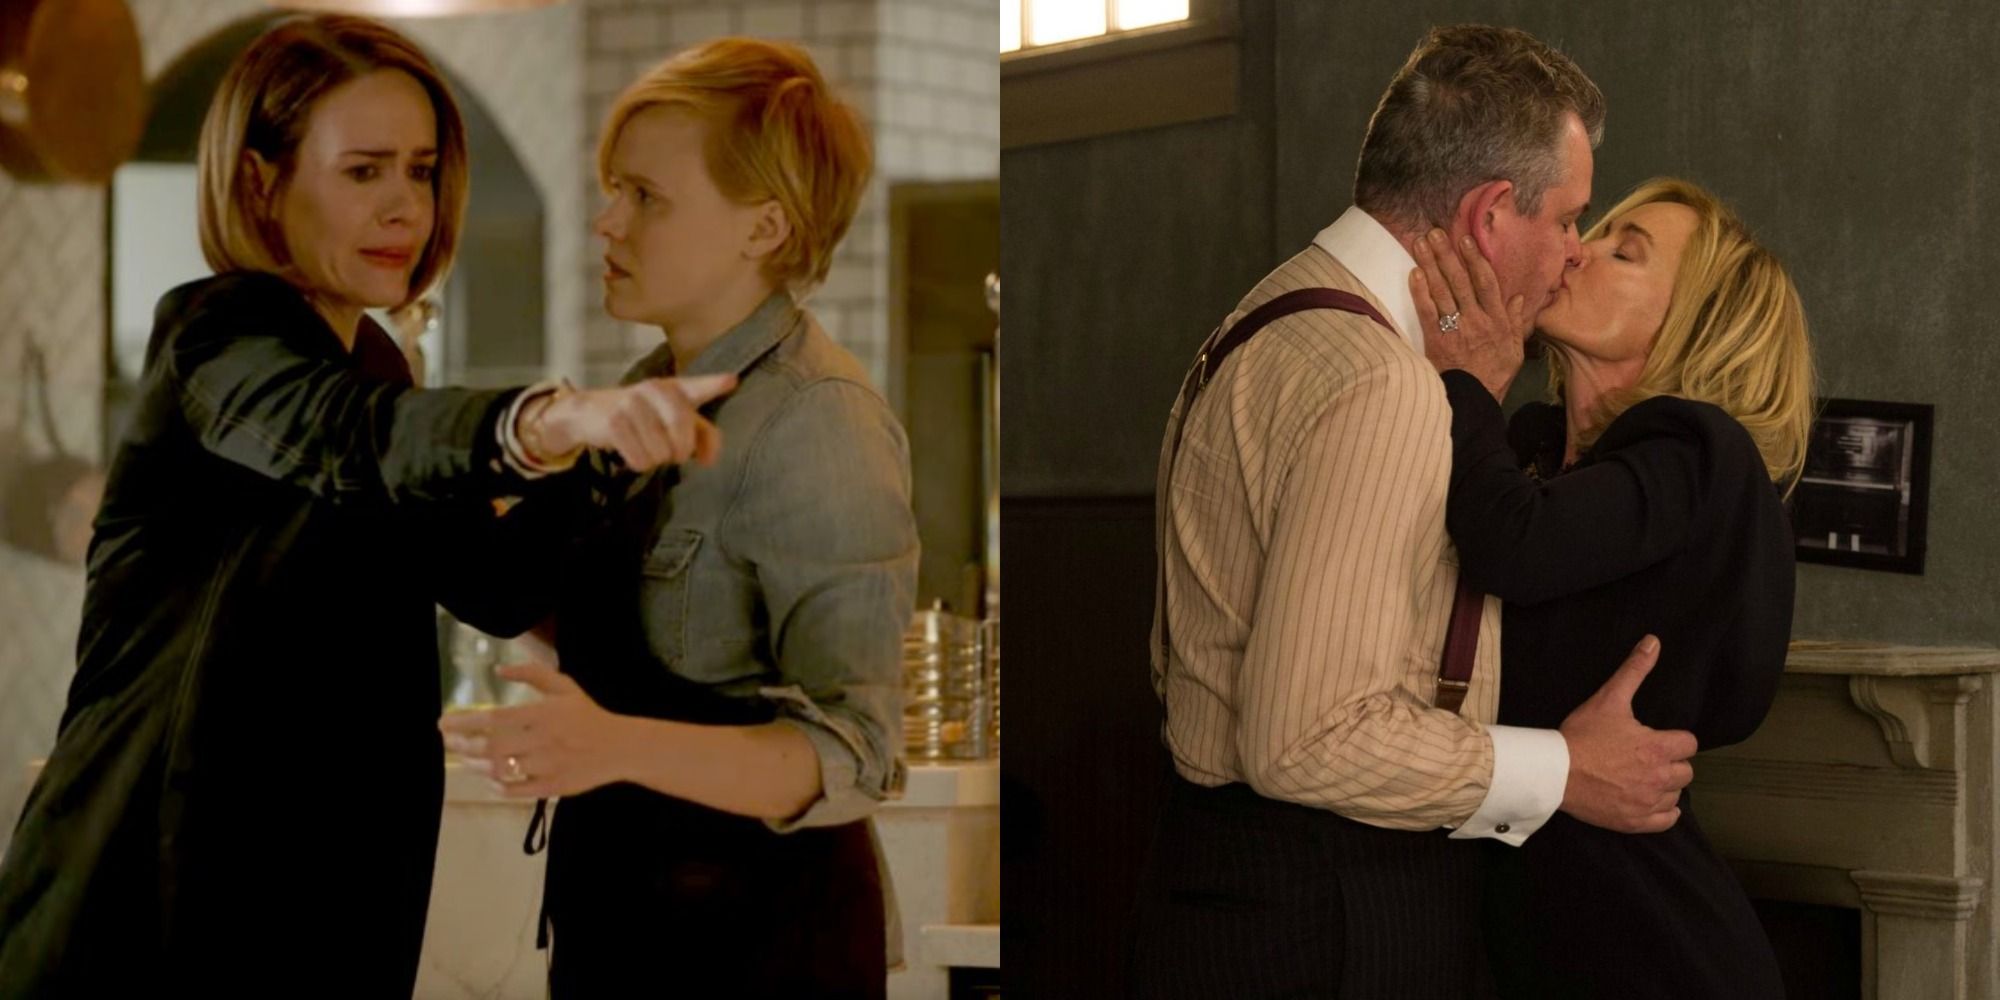 Split image of couples from the American Horror Story series.